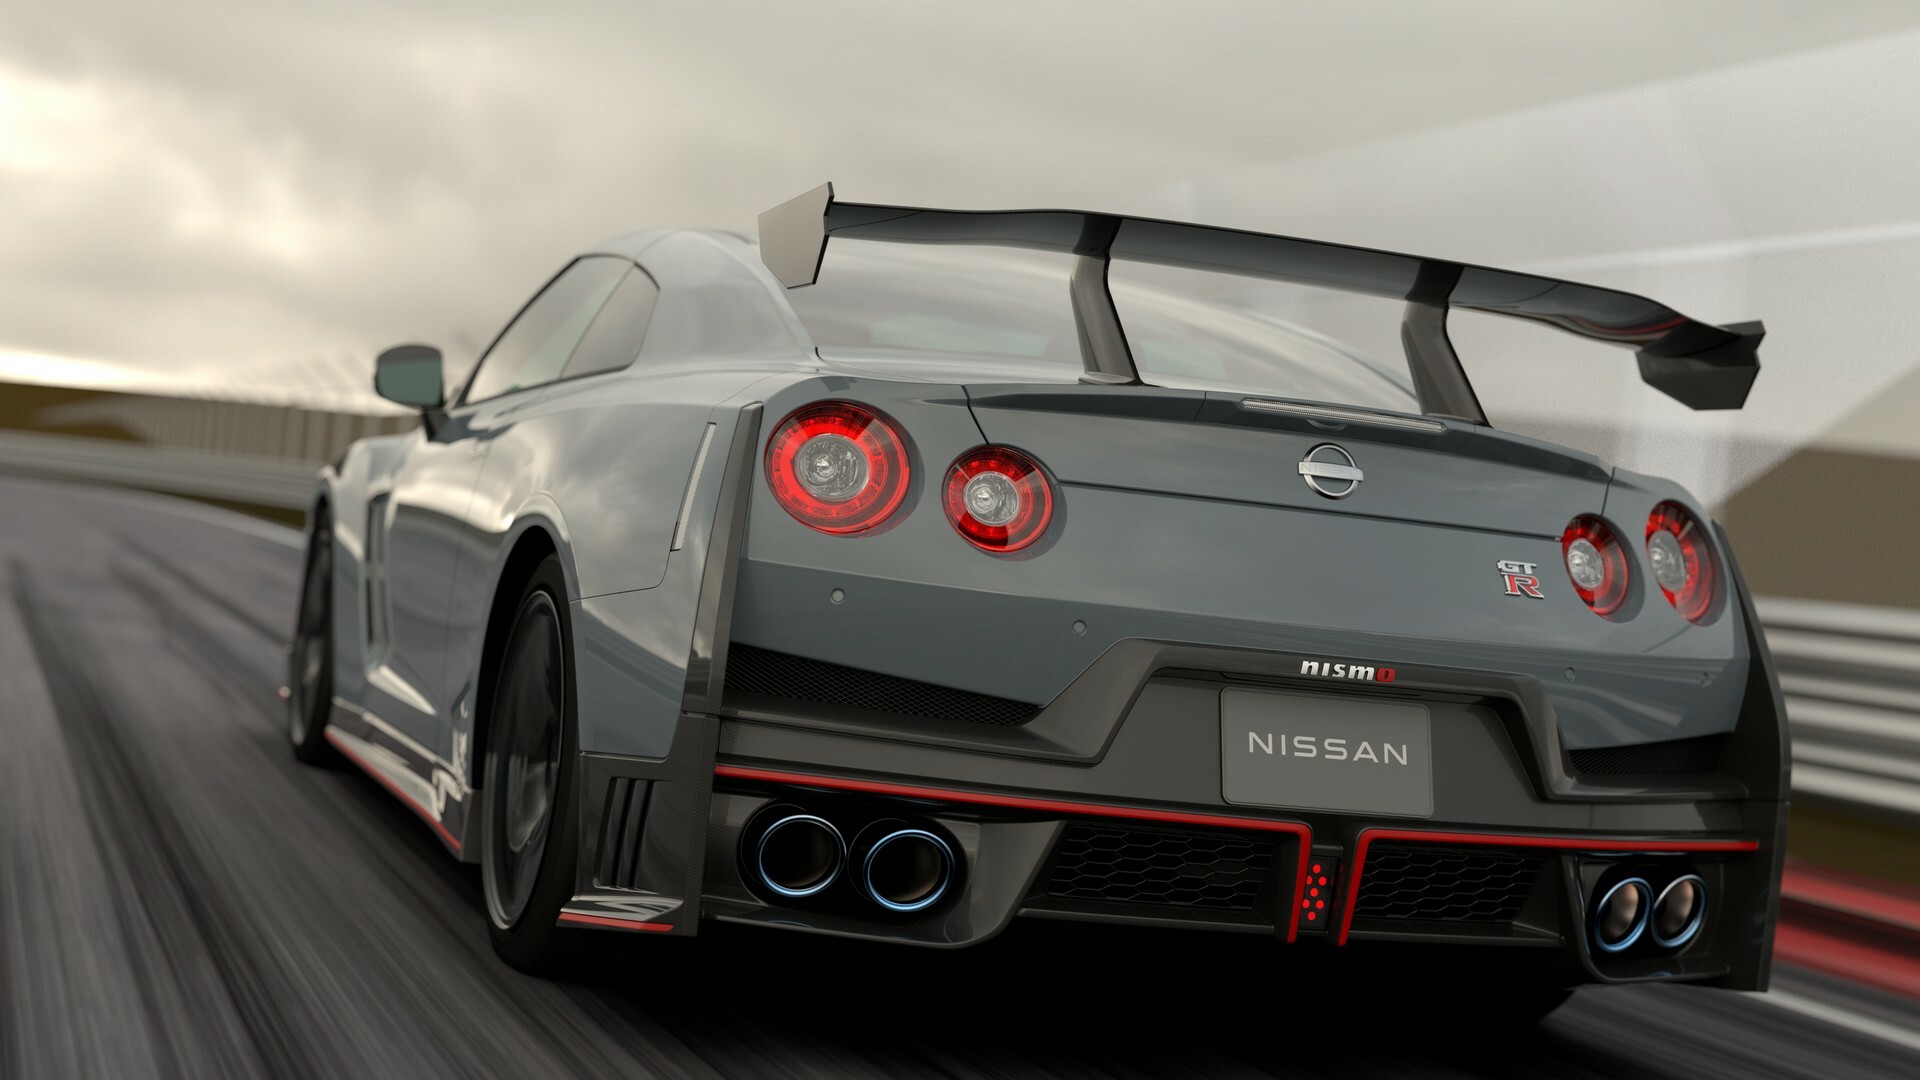 RUMOR: The R36 Nissan GT-R Will Not Be A Hybrid